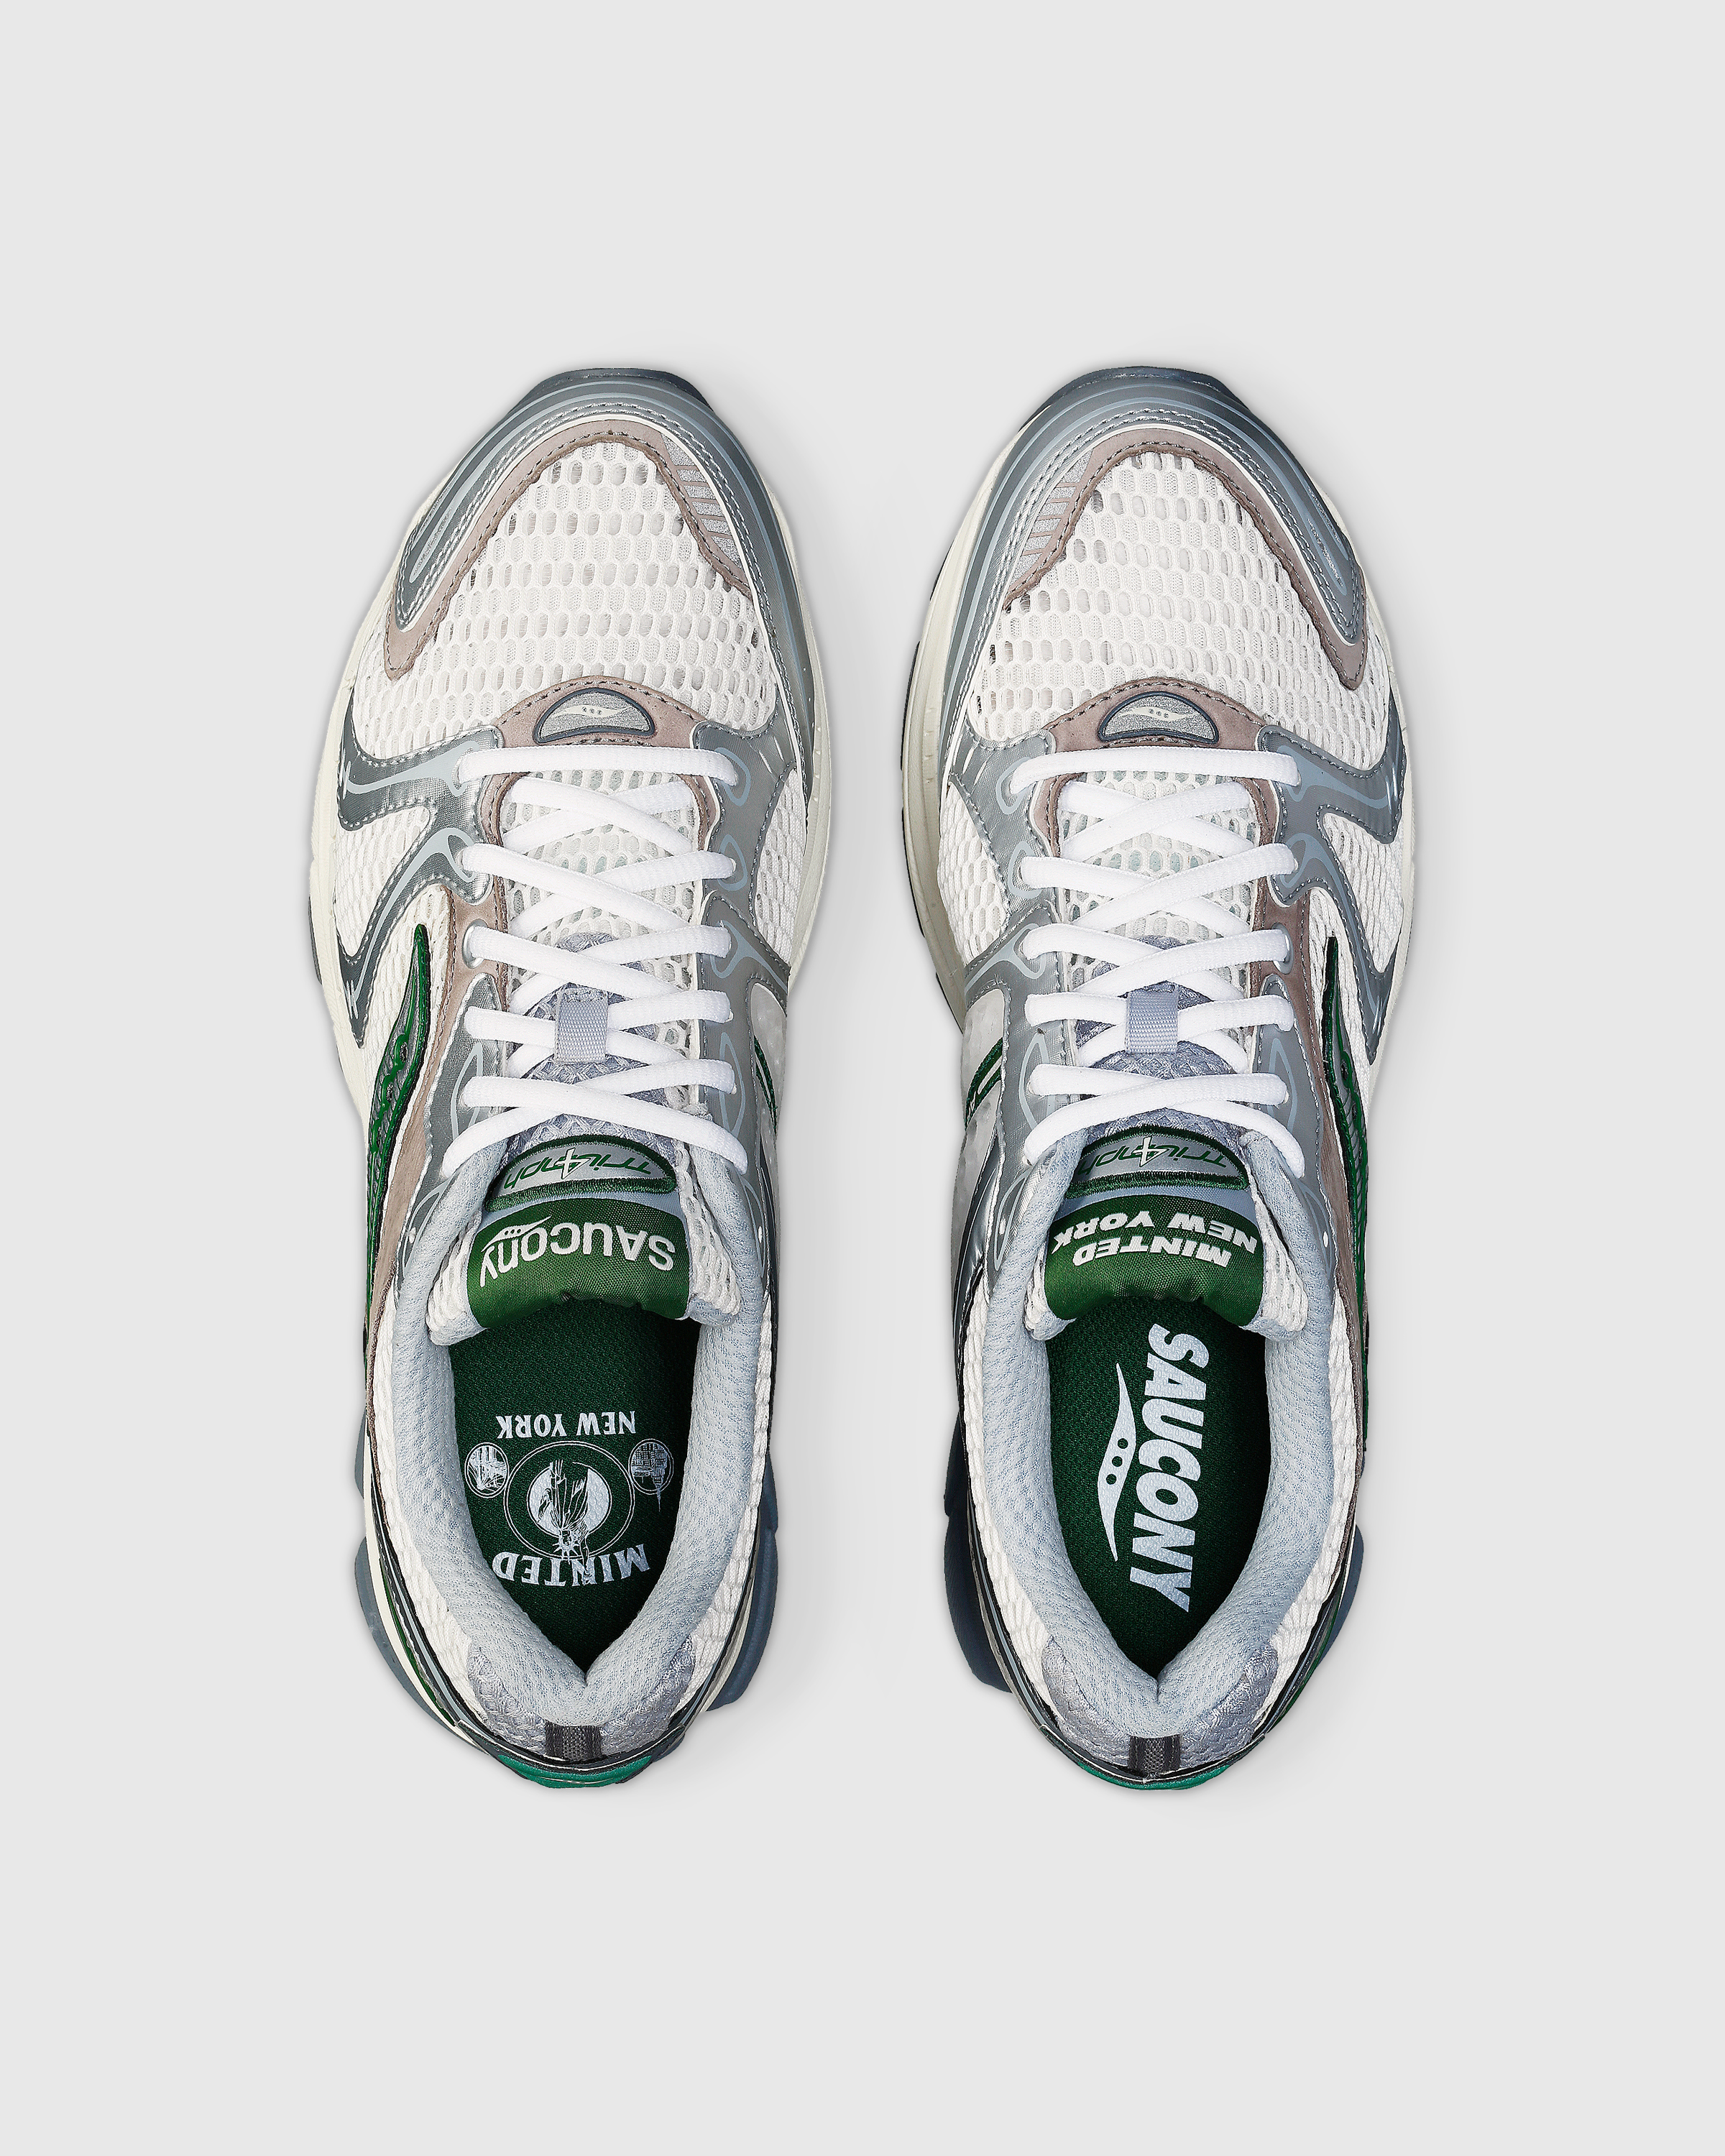 Saucony x Minted – ProGrid Triumph 4 Cream/Green - Low Top Sneakers - Beige - Image 4